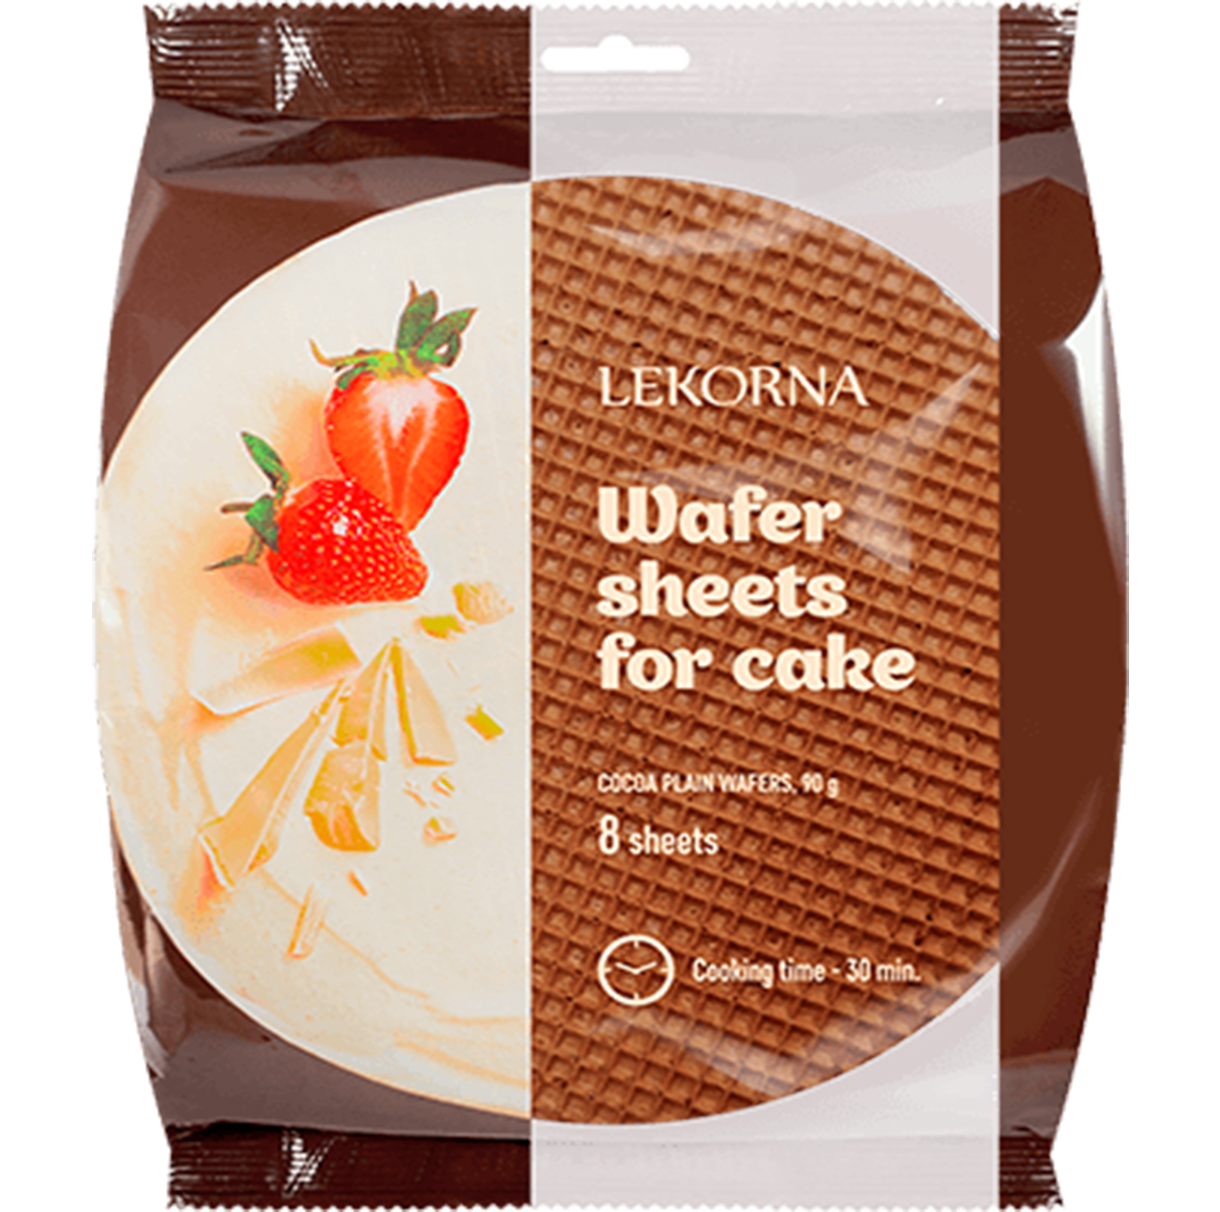 Waffle Sheets for Cake with Cocoa, Lekorna, 8 Sheets, 90g / 3.17oz